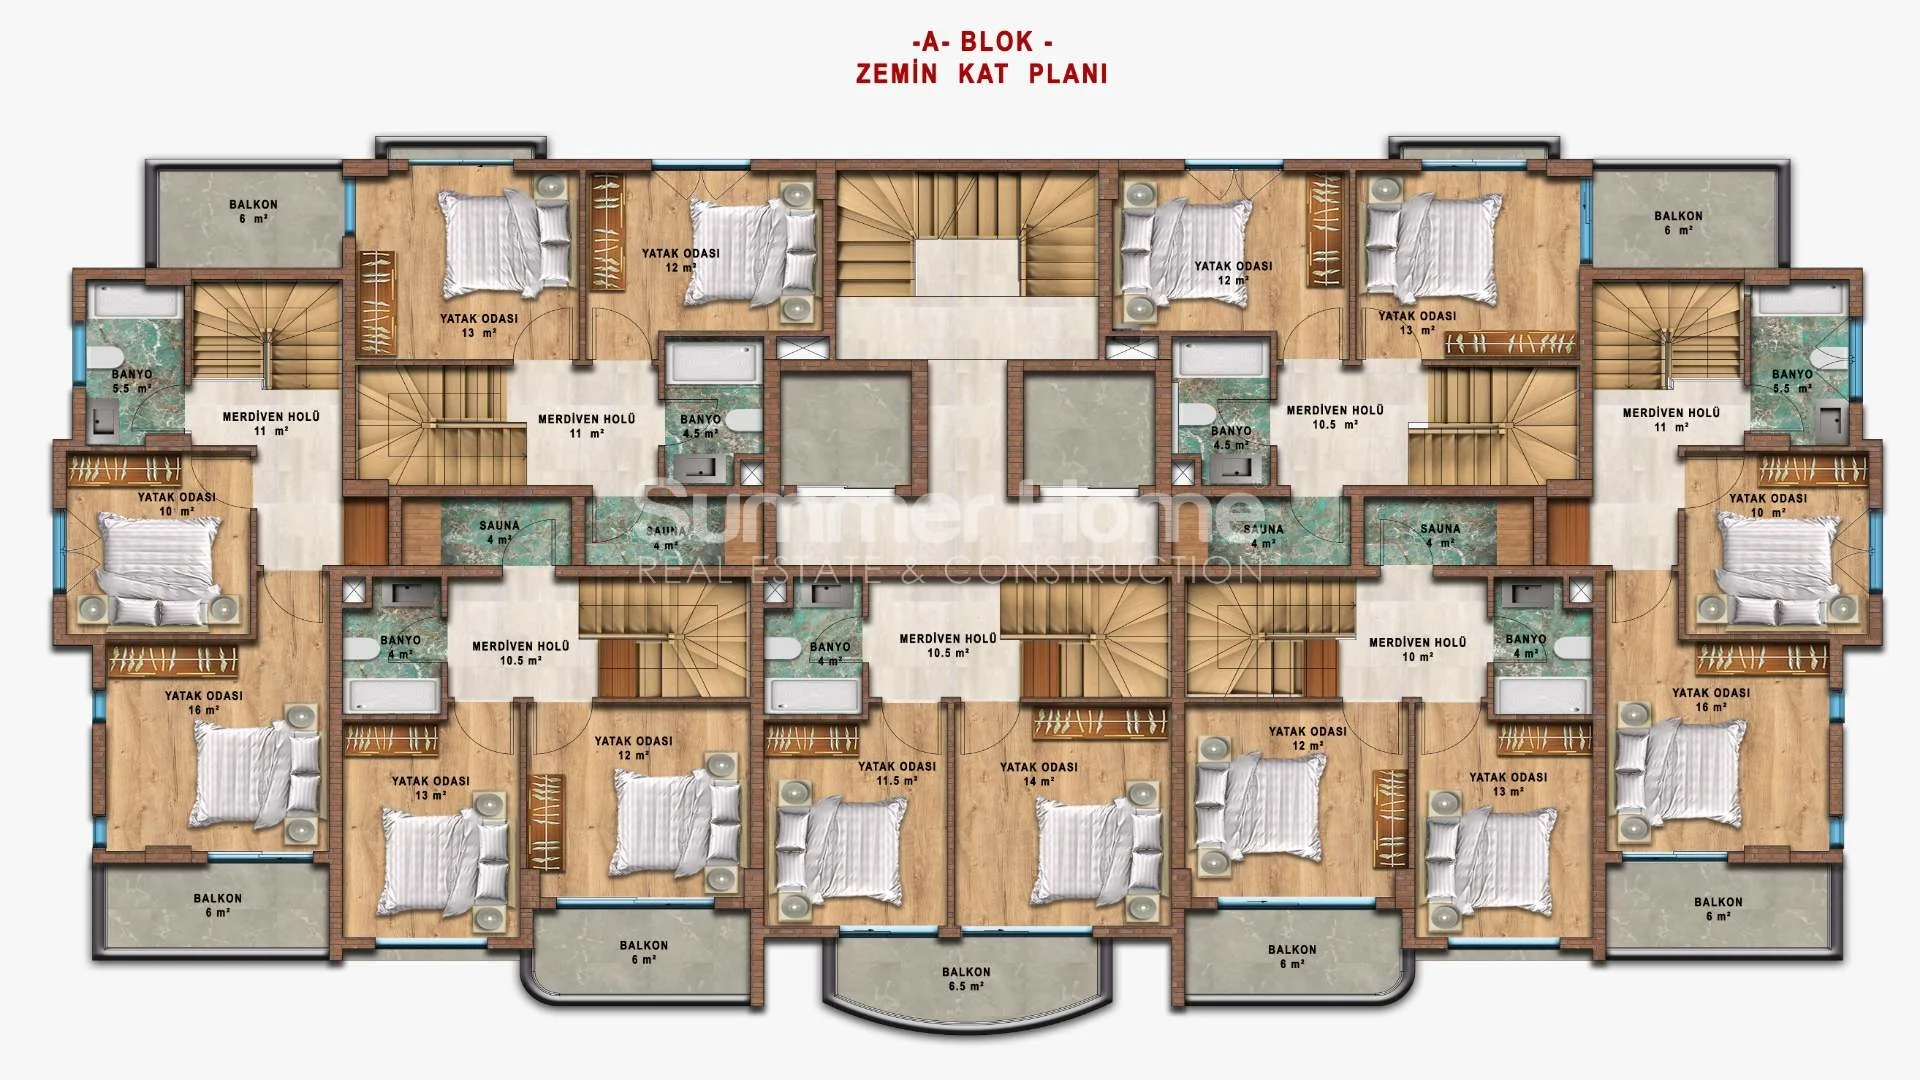 Exquisite Sea View Apartments For Sale in Turkler Plan - 49